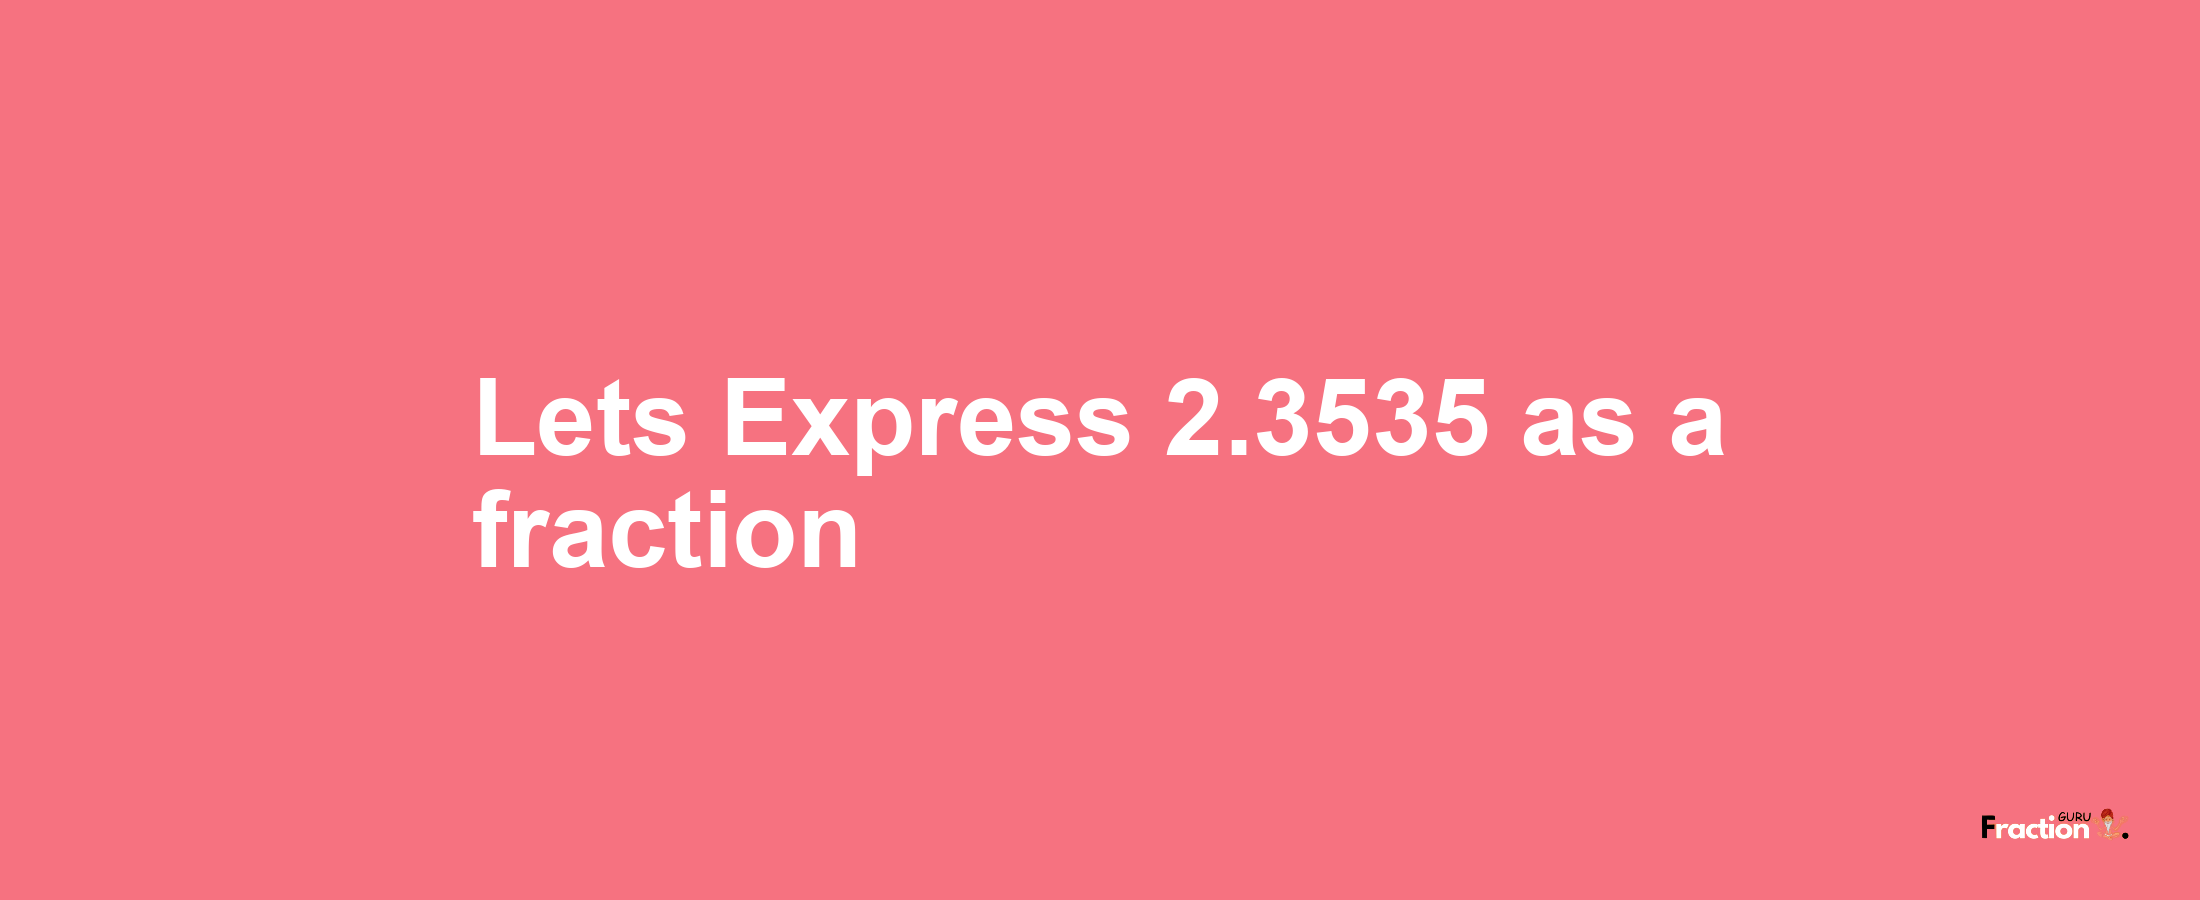 Lets Express 2.3535 as afraction